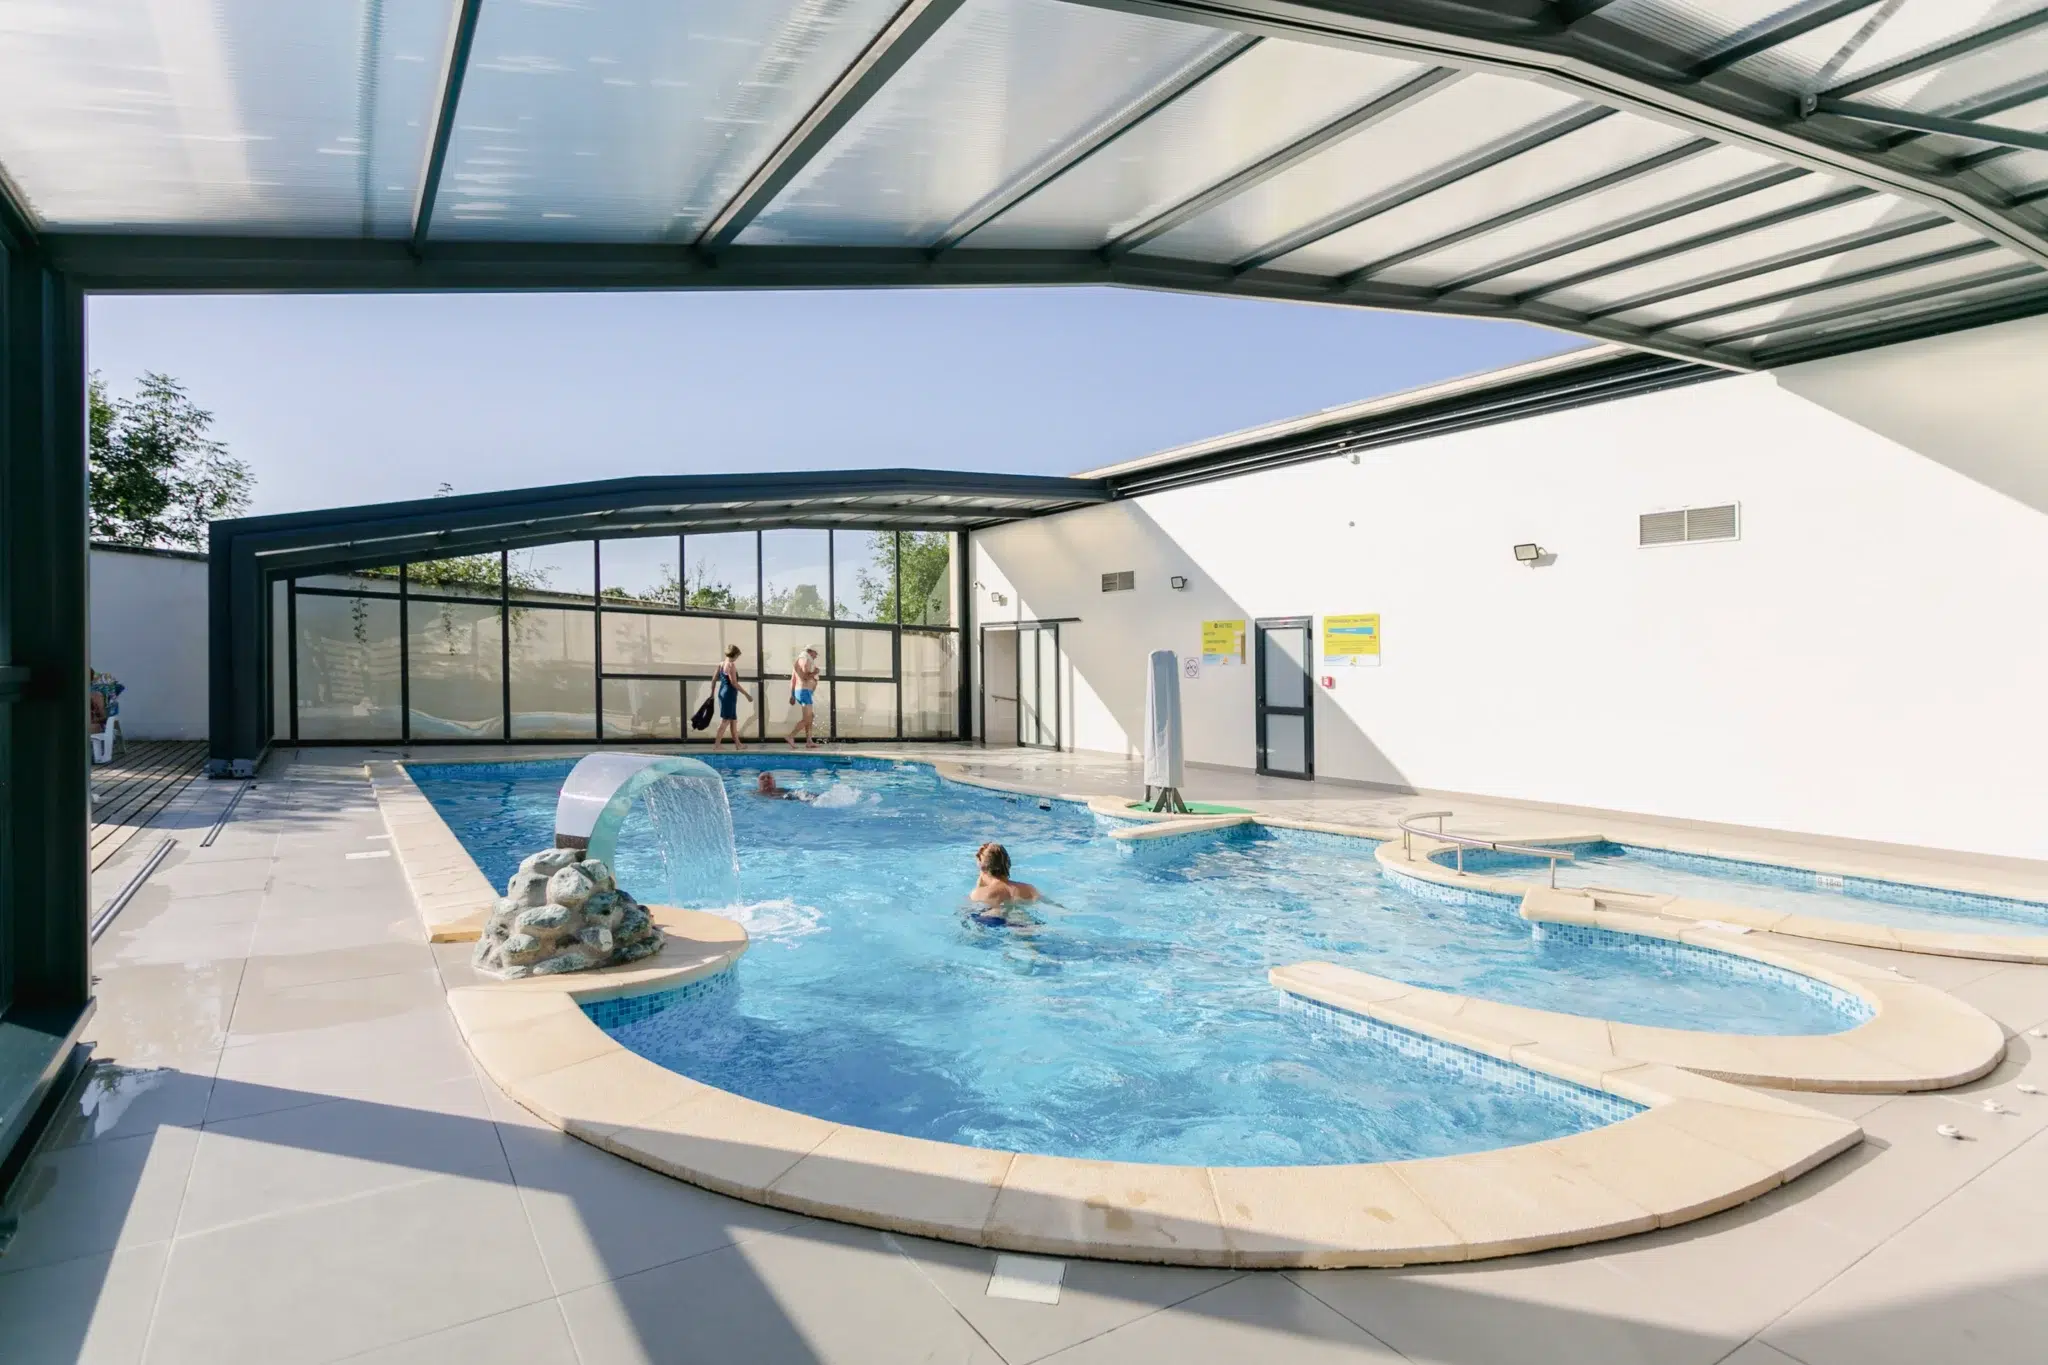 camping pool coucrte chauffét moselle